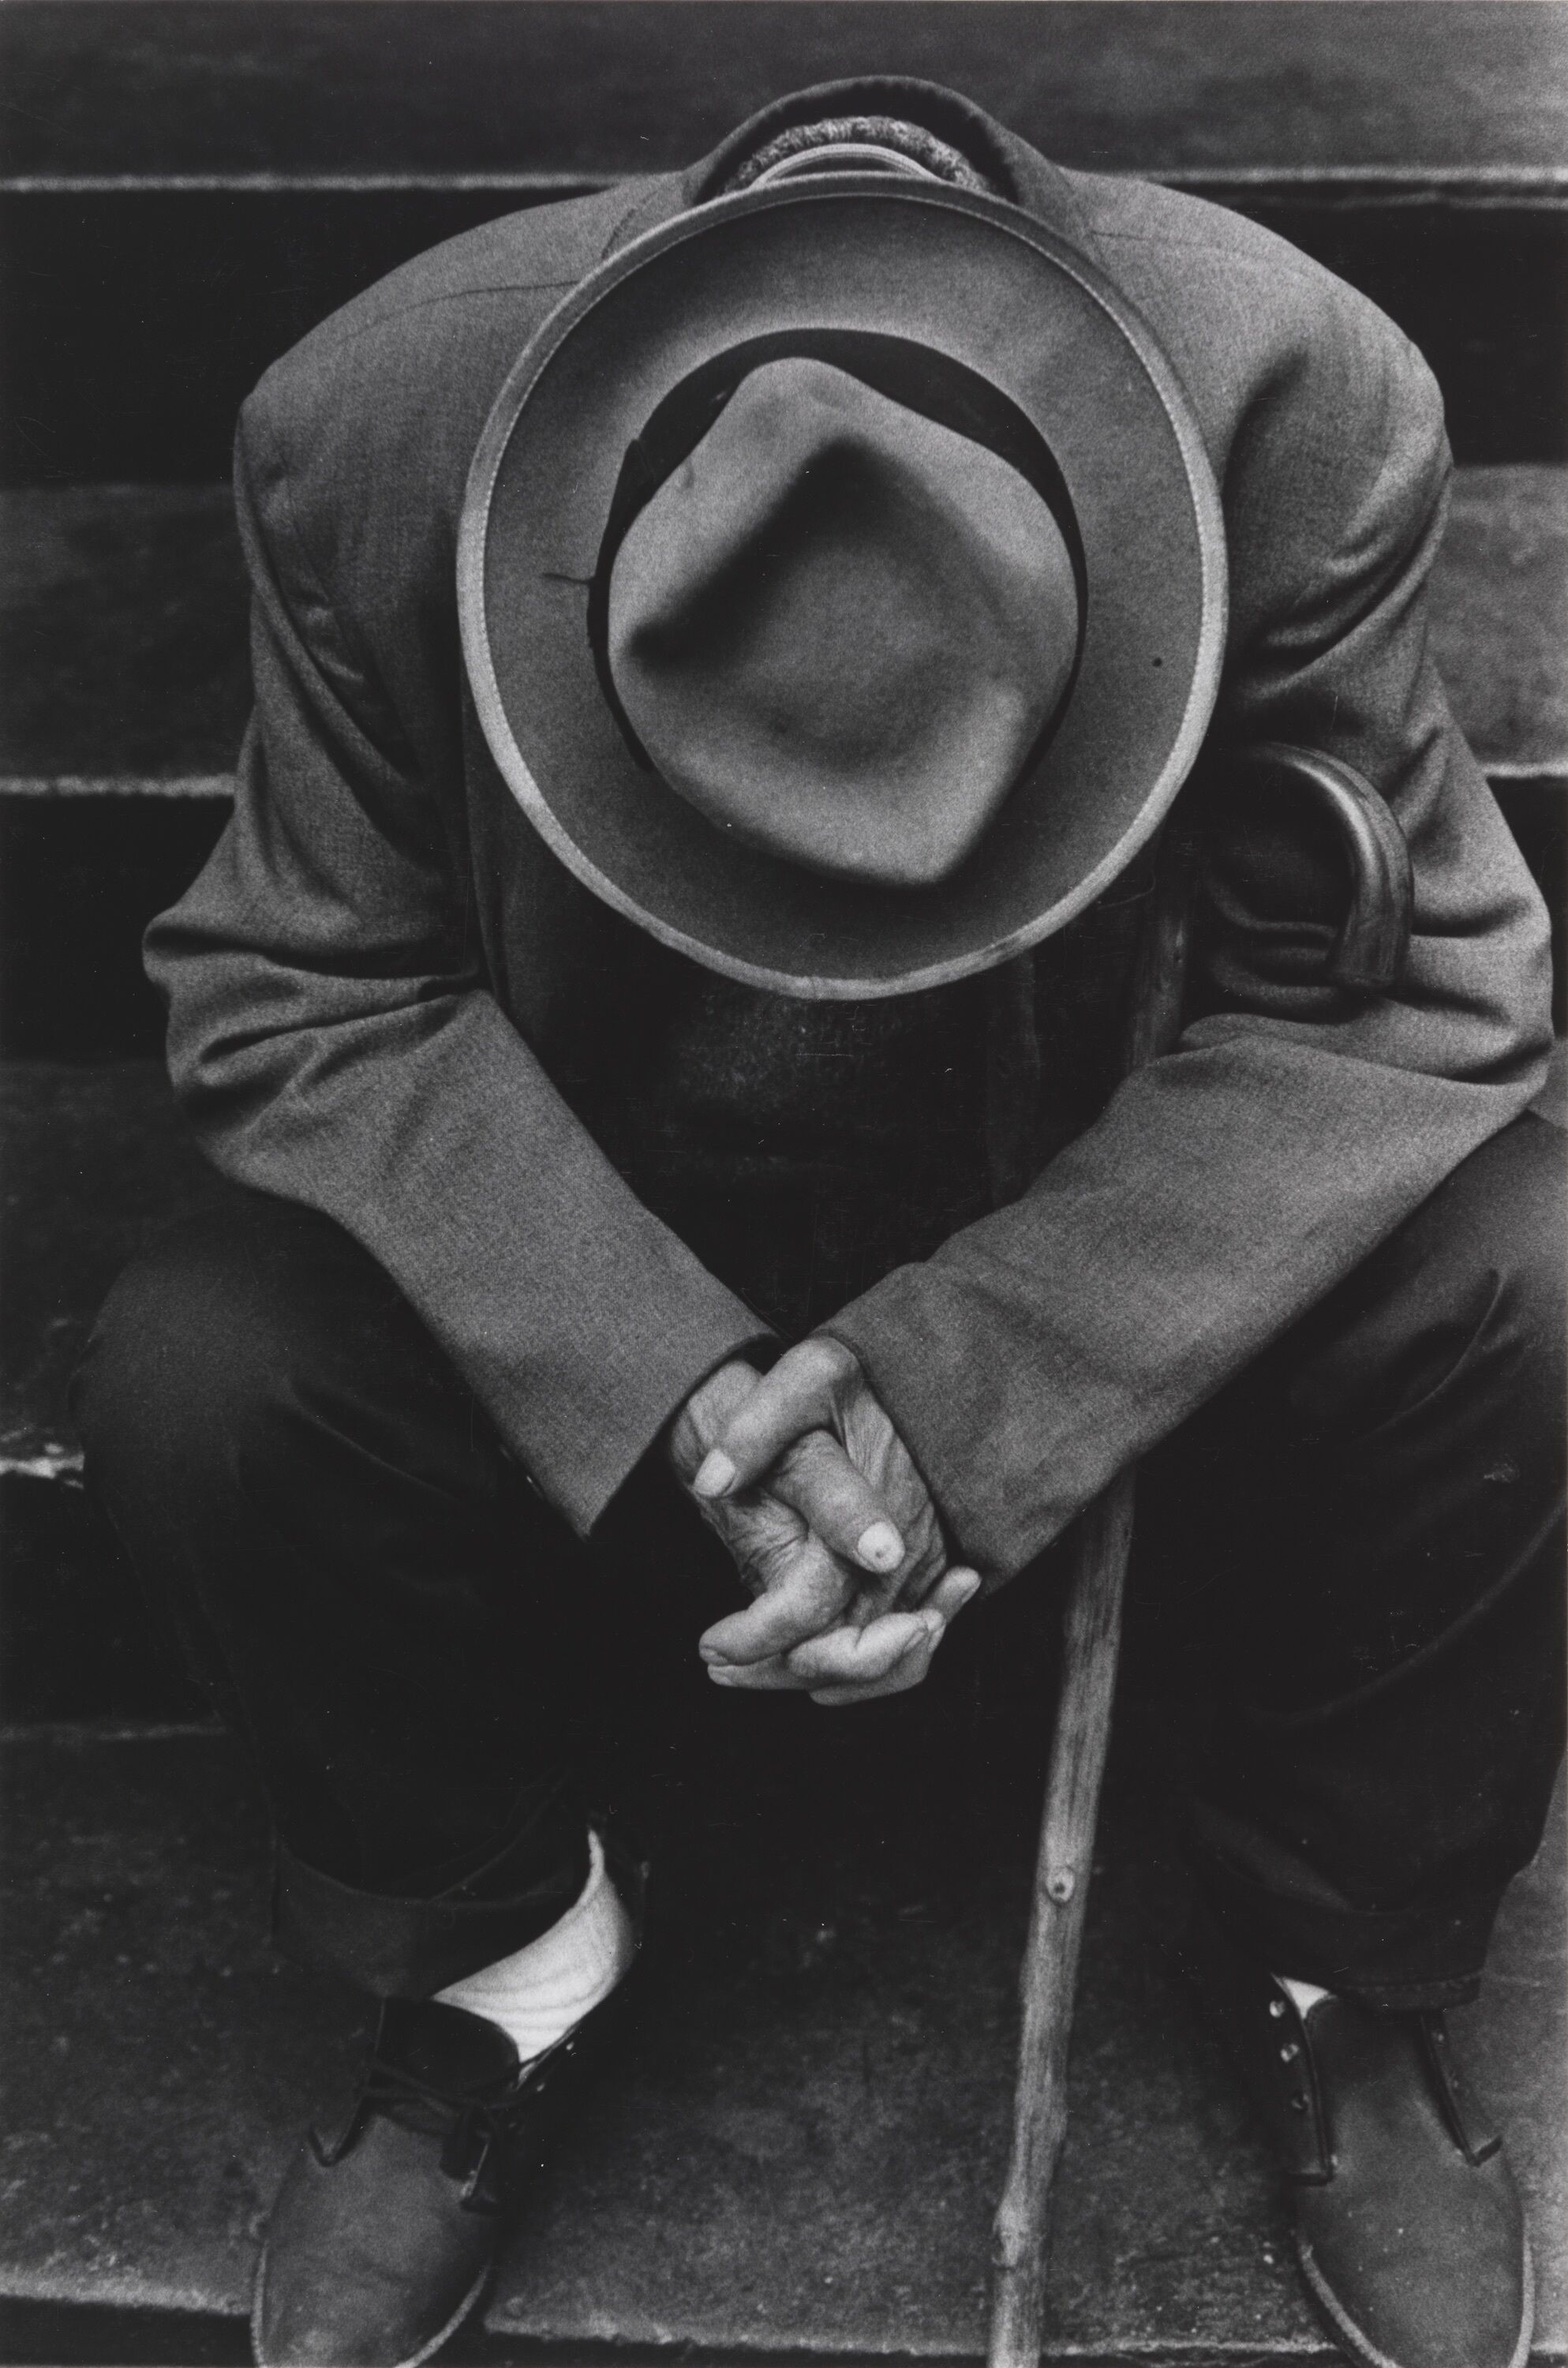 A person wearing a hat sitting with their head down and their hands clasped together.